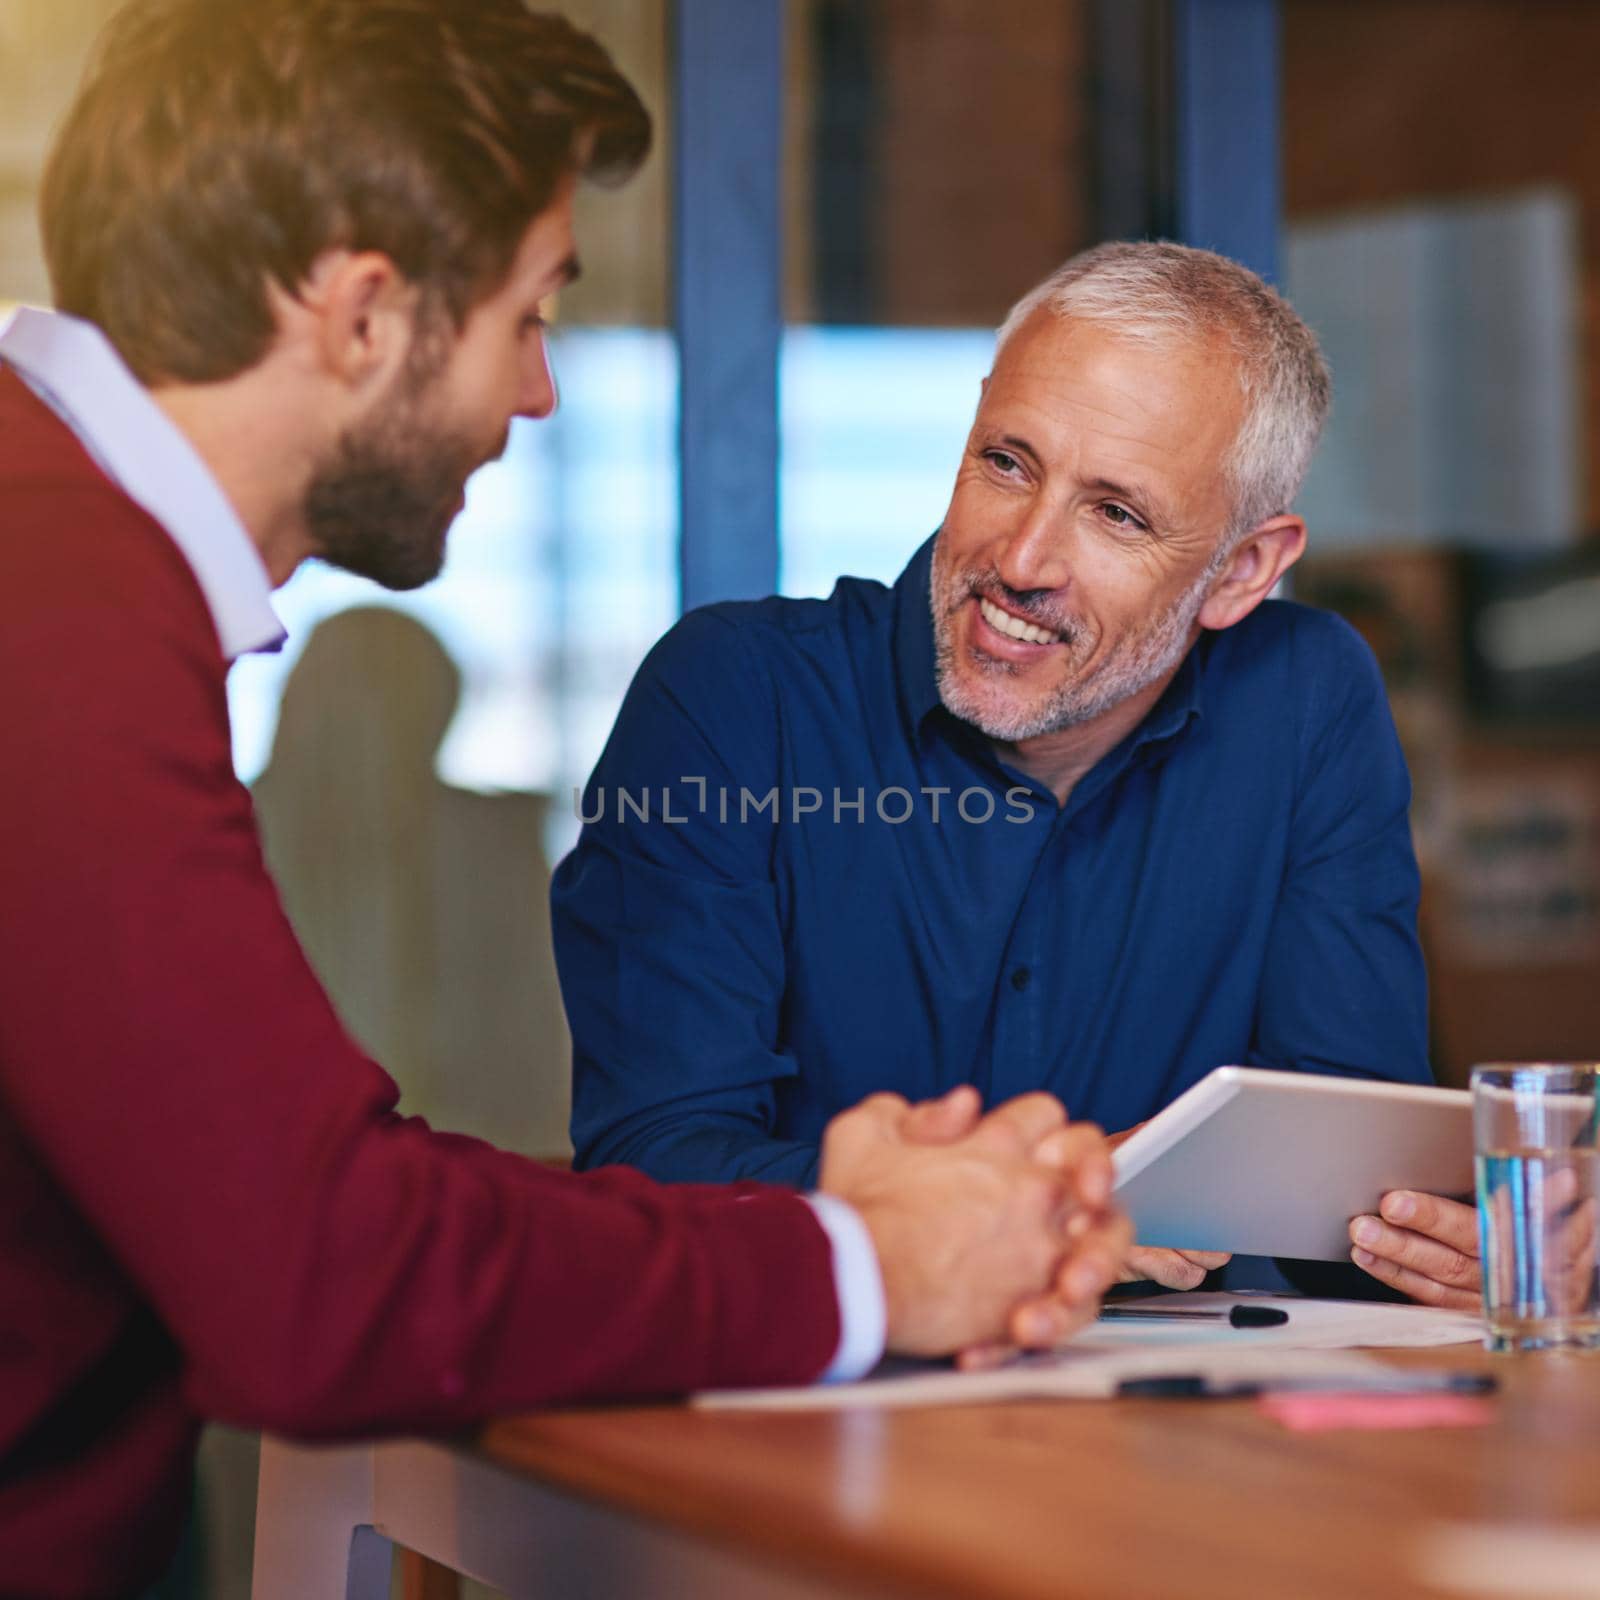 Shot of two businessmen having a meeting in an office.